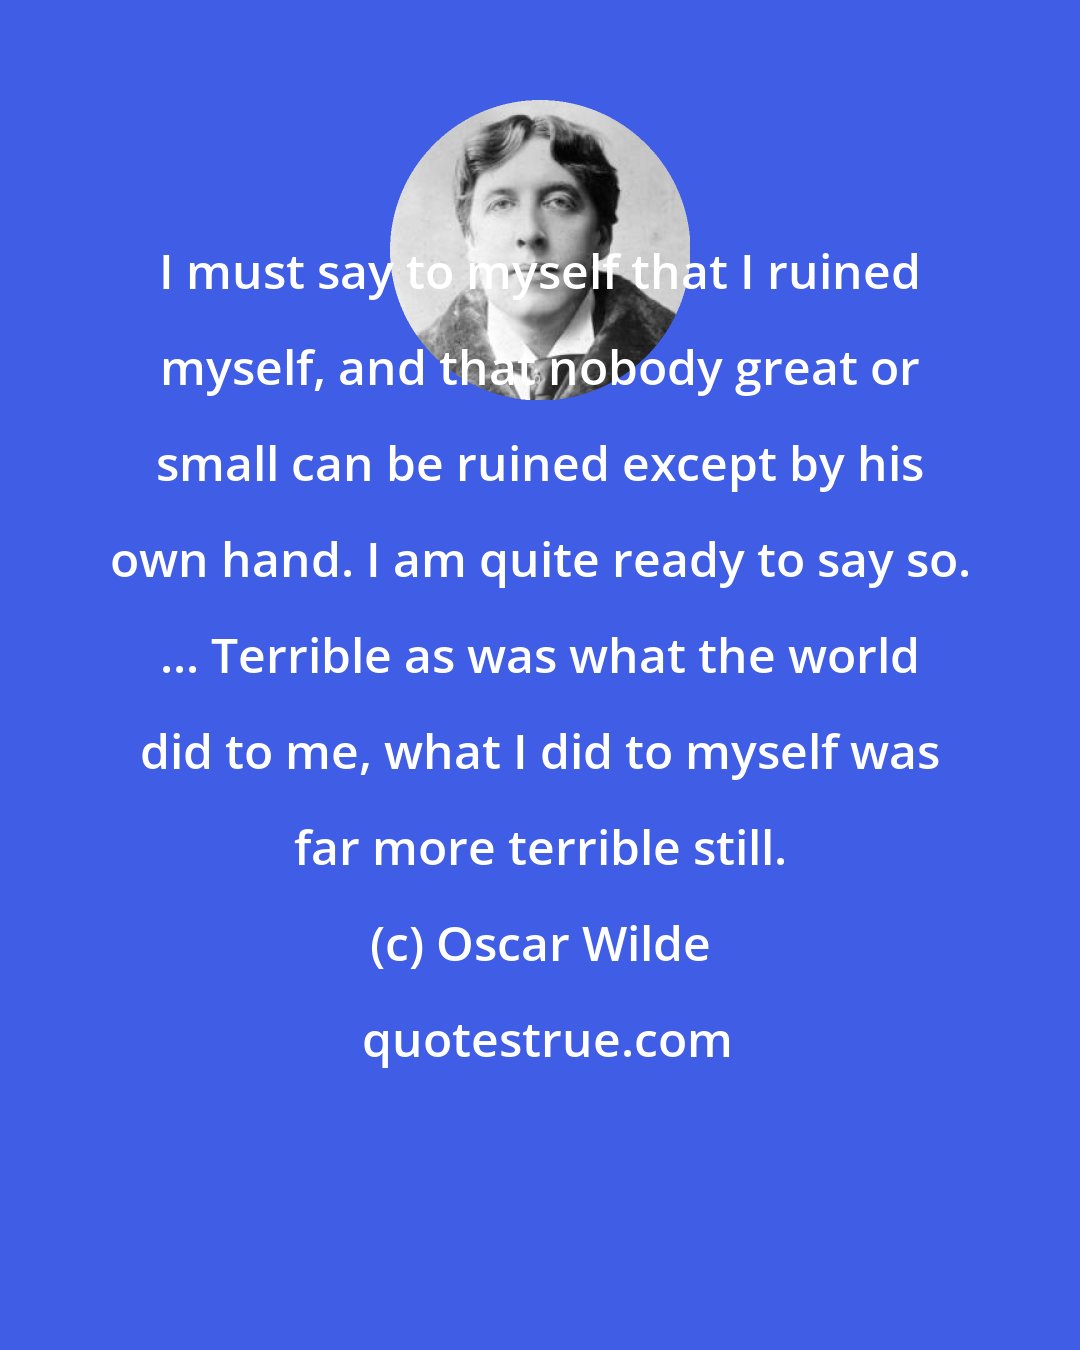 Oscar Wilde: I must say to myself that I ruined myself, and that nobody great or small can be ruined except by his own hand. I am quite ready to say so. ... Terrible as was what the world did to me, what I did to myself was far more terrible still.